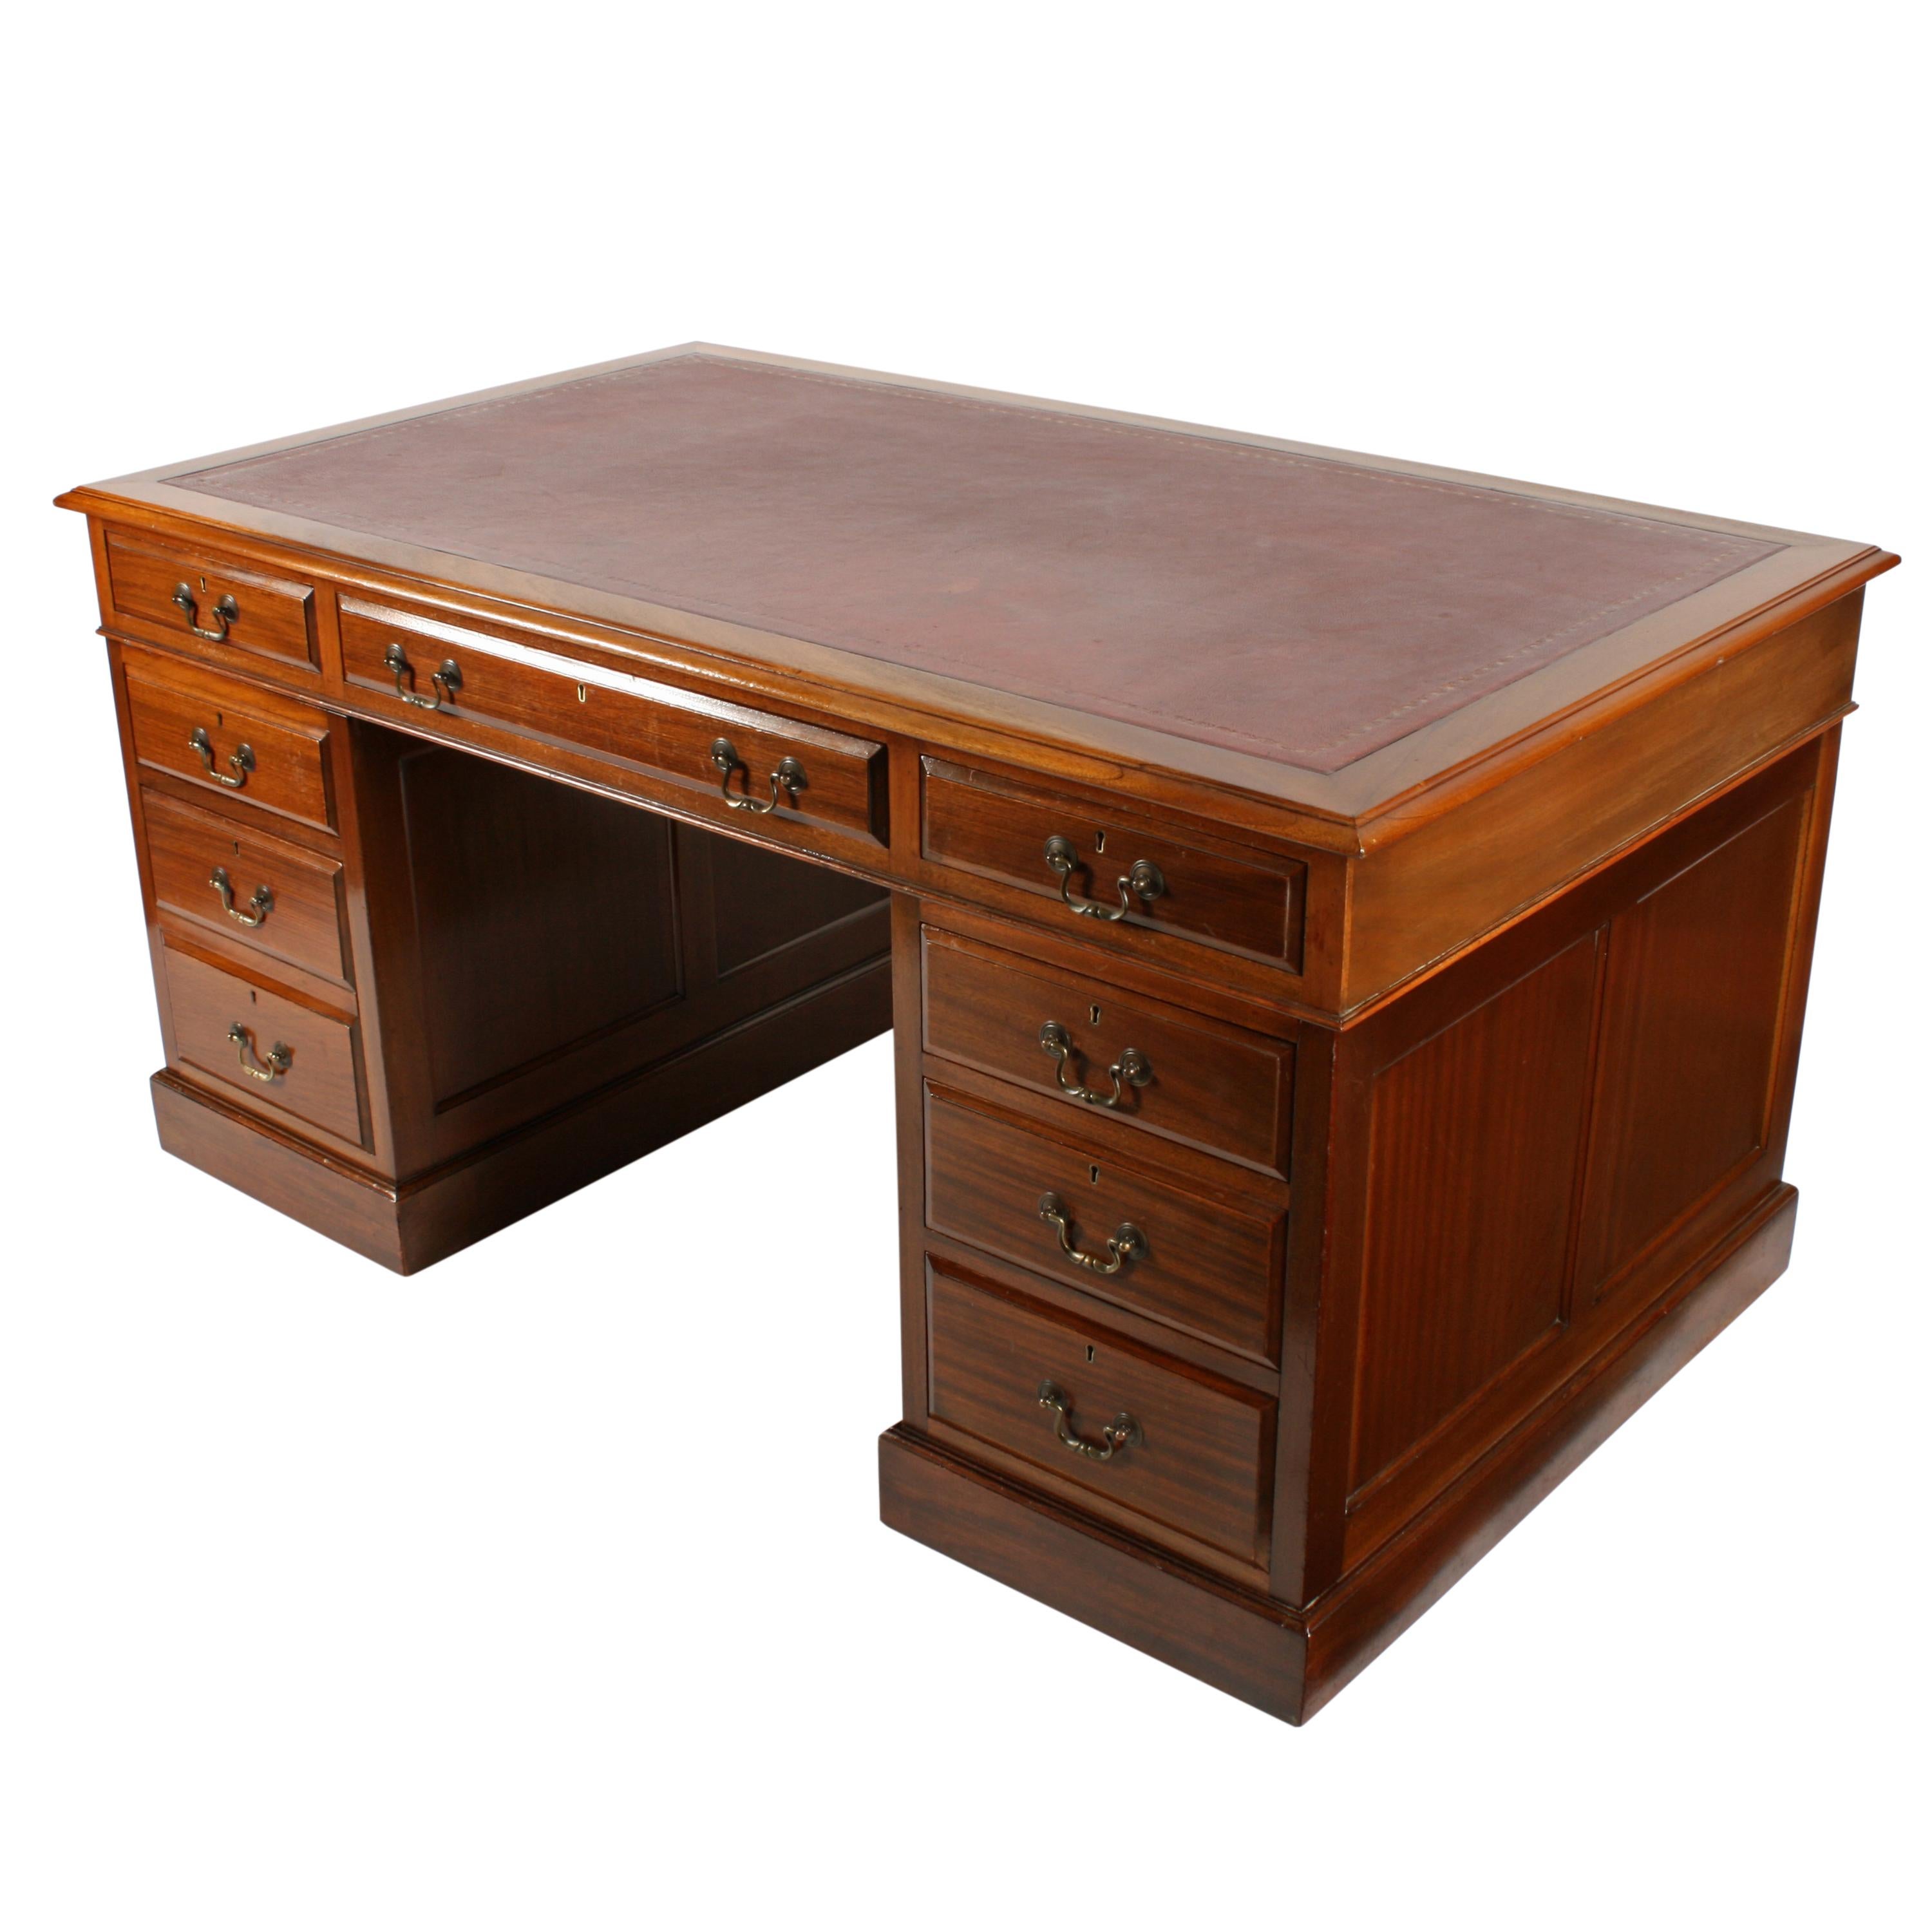 An early 20th century Georgian style mahogany pedestal desk.

The desk has two pedestals that have three drawers each, panelled sides and are polished at the back.

The desk top has an old burgundy colored leather writing surface with a gold